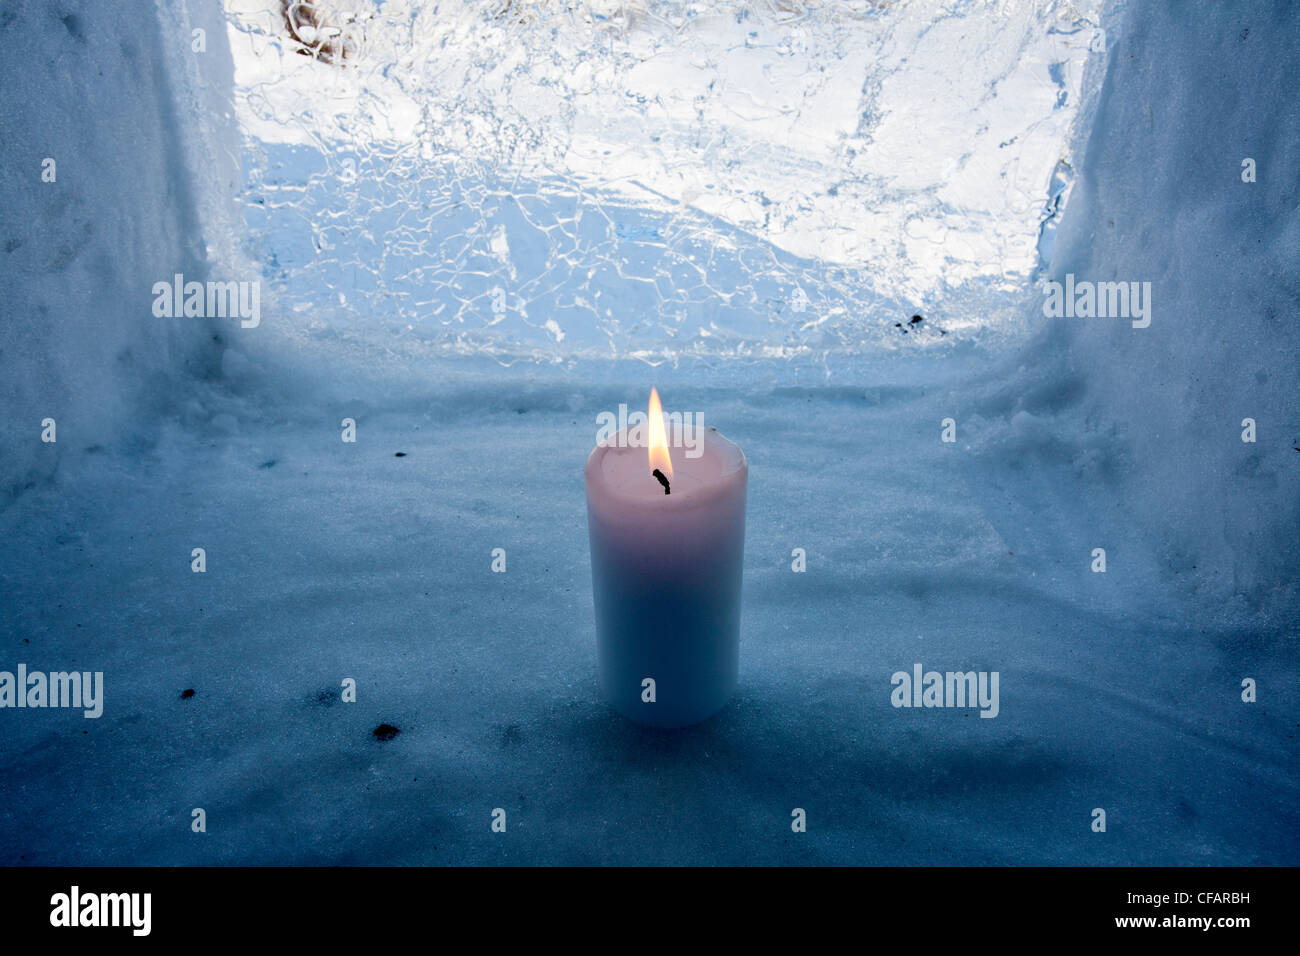 Candle Burning at winter Banque D'Images